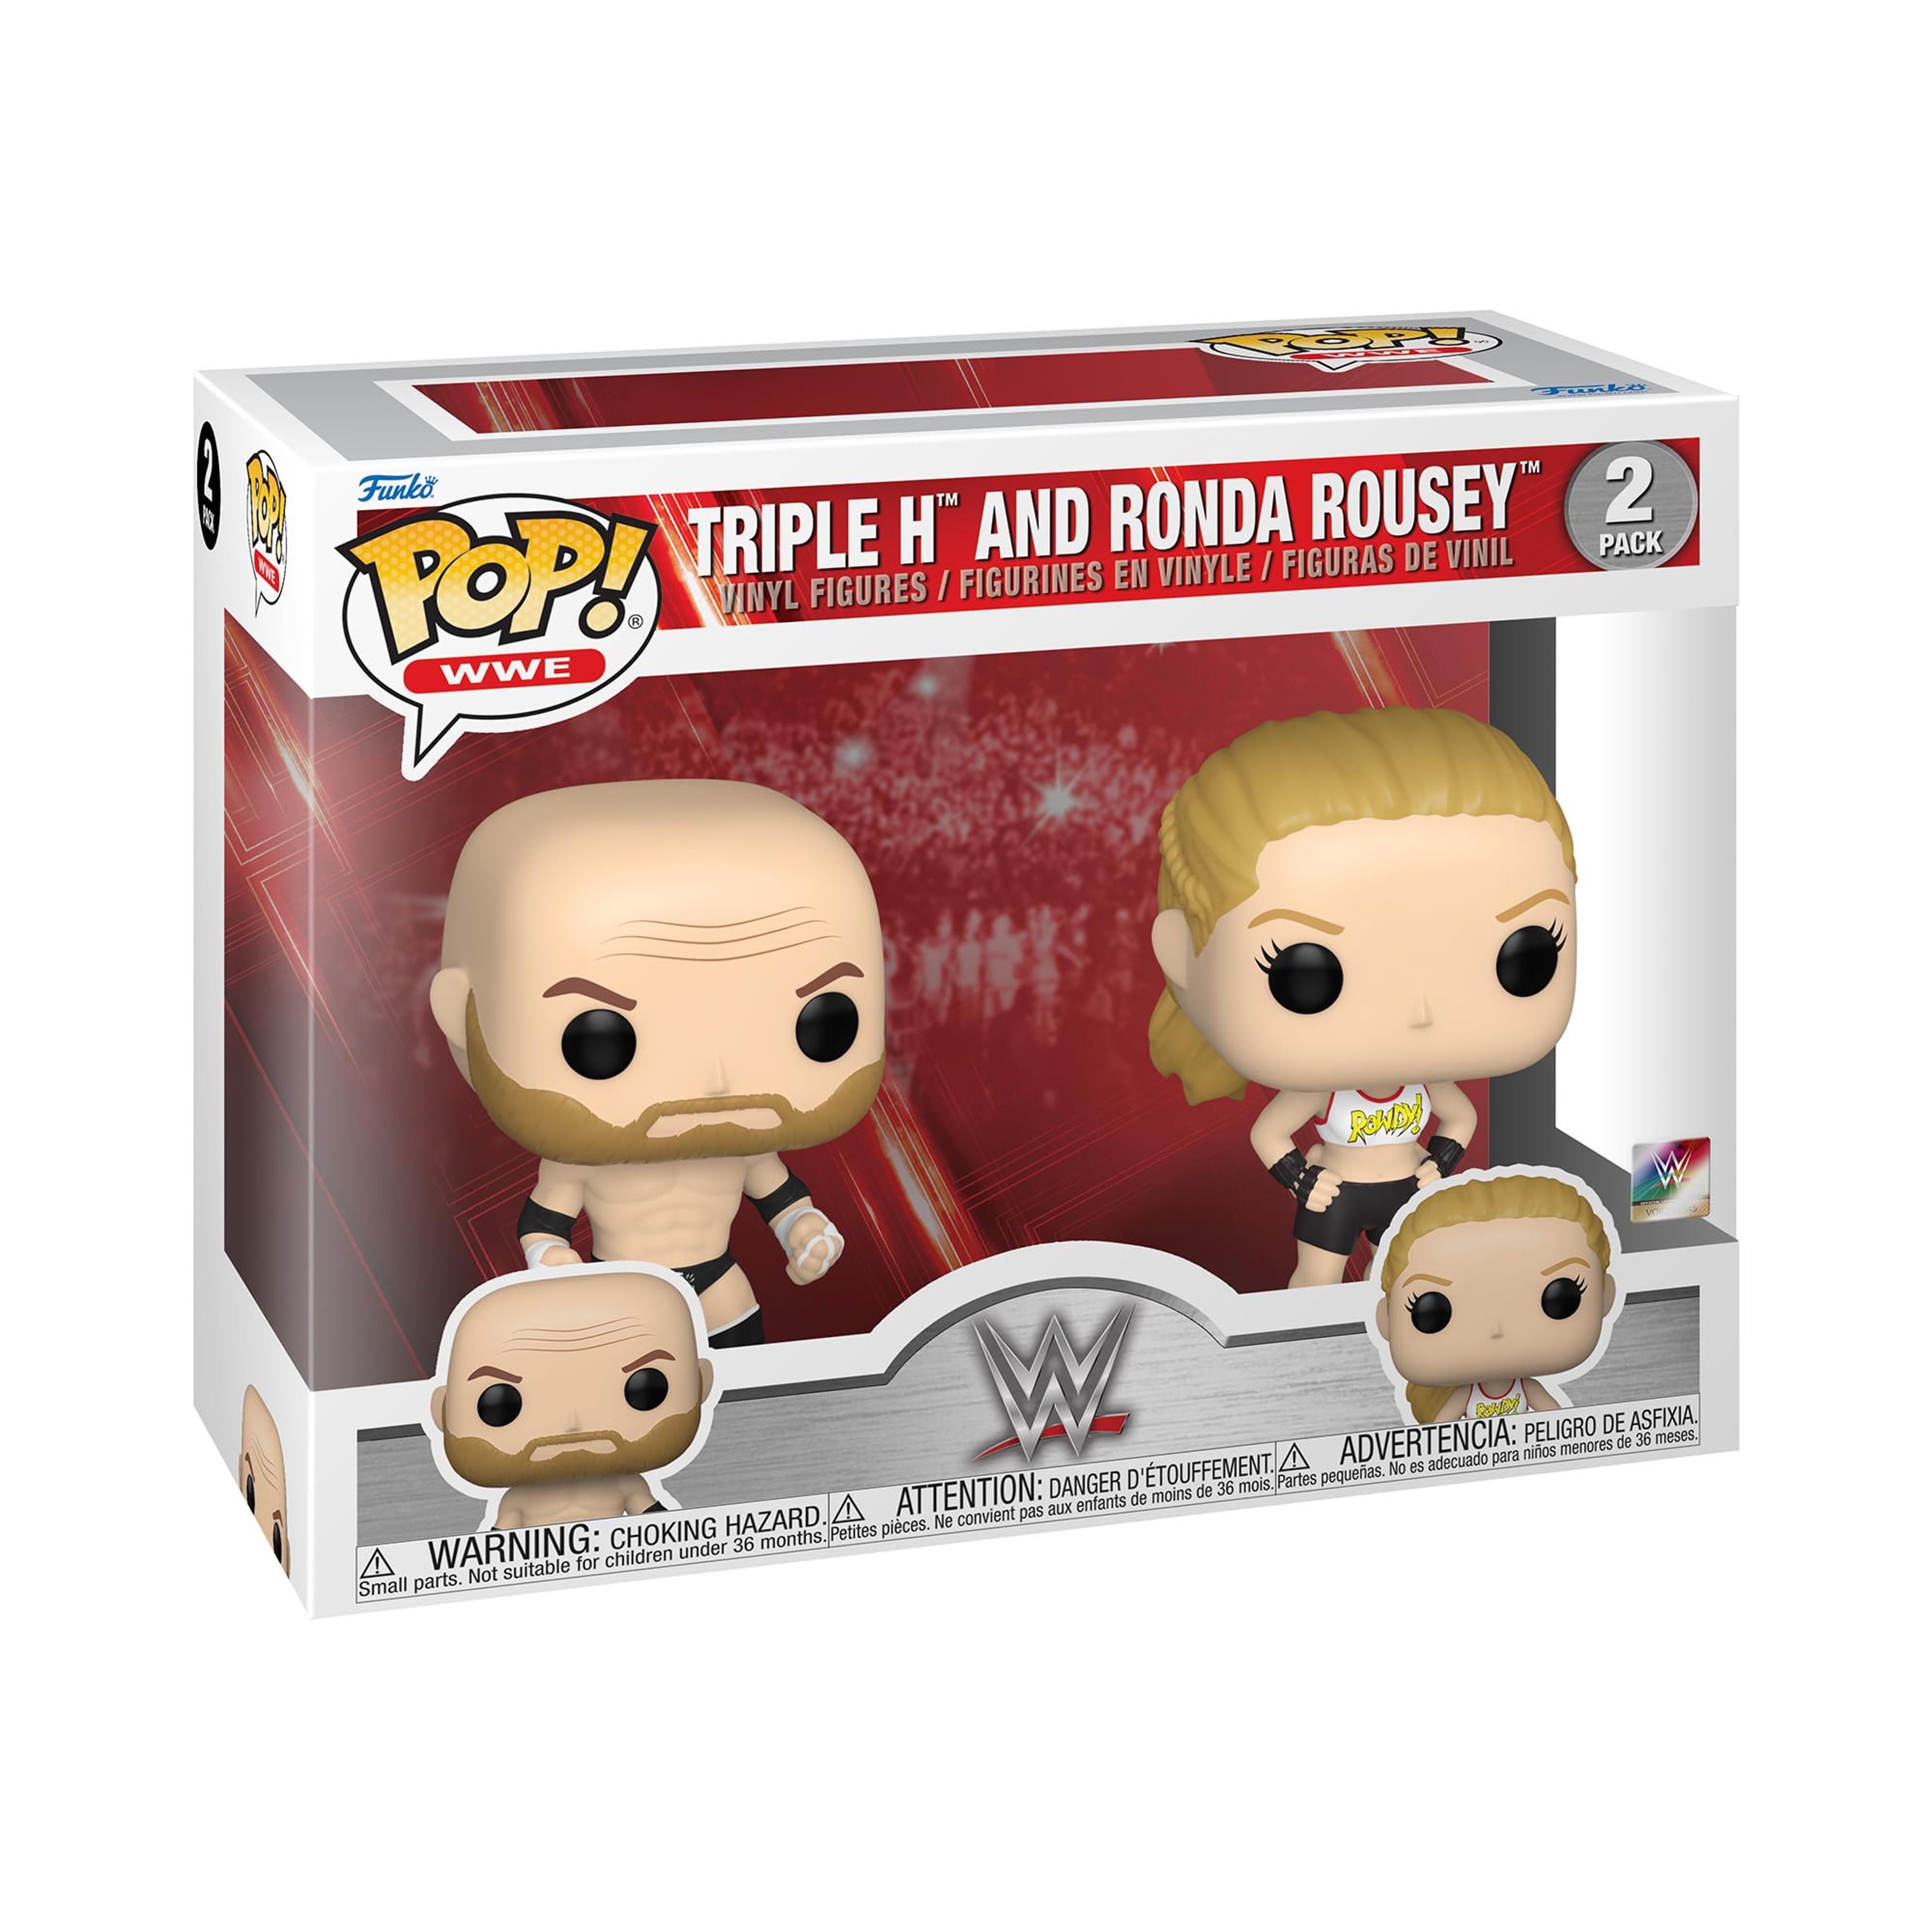 Funko POP! WWE - Triple H and Ronda Rousey #2-Pack